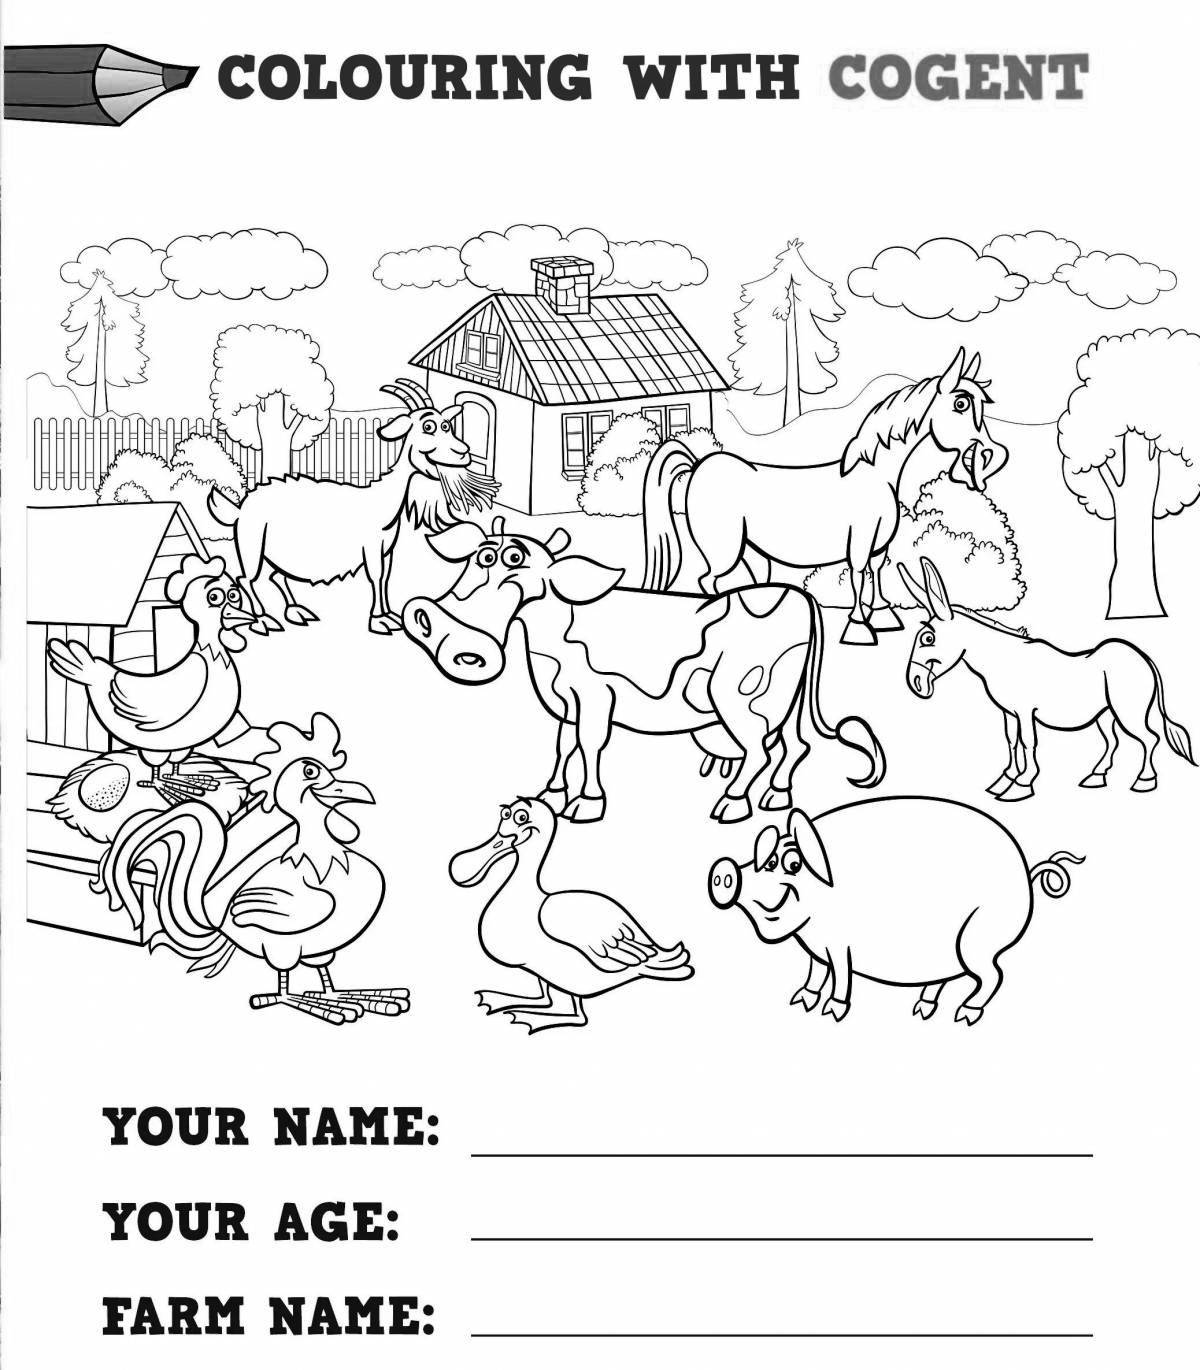 Coloring page bright pig